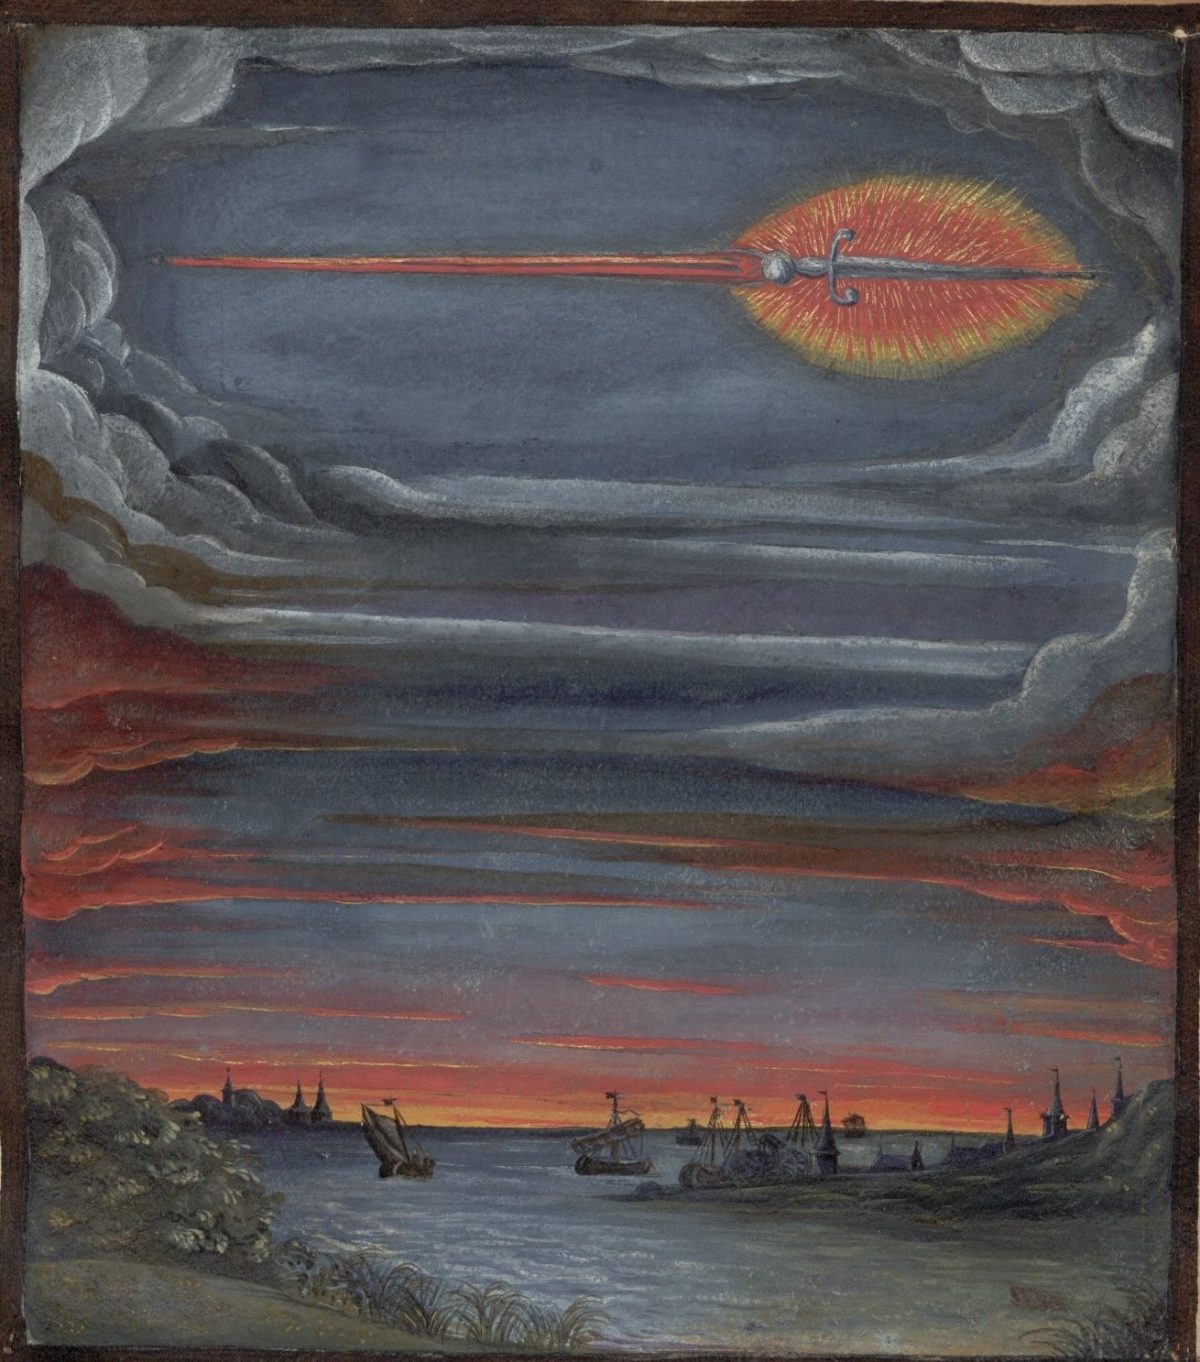 Watercolour from the Comet Book ('Kometenbuch') a 16th century album of stylised sketches of both comets and meteors produced in Flanders or Northern France, ca. 1587